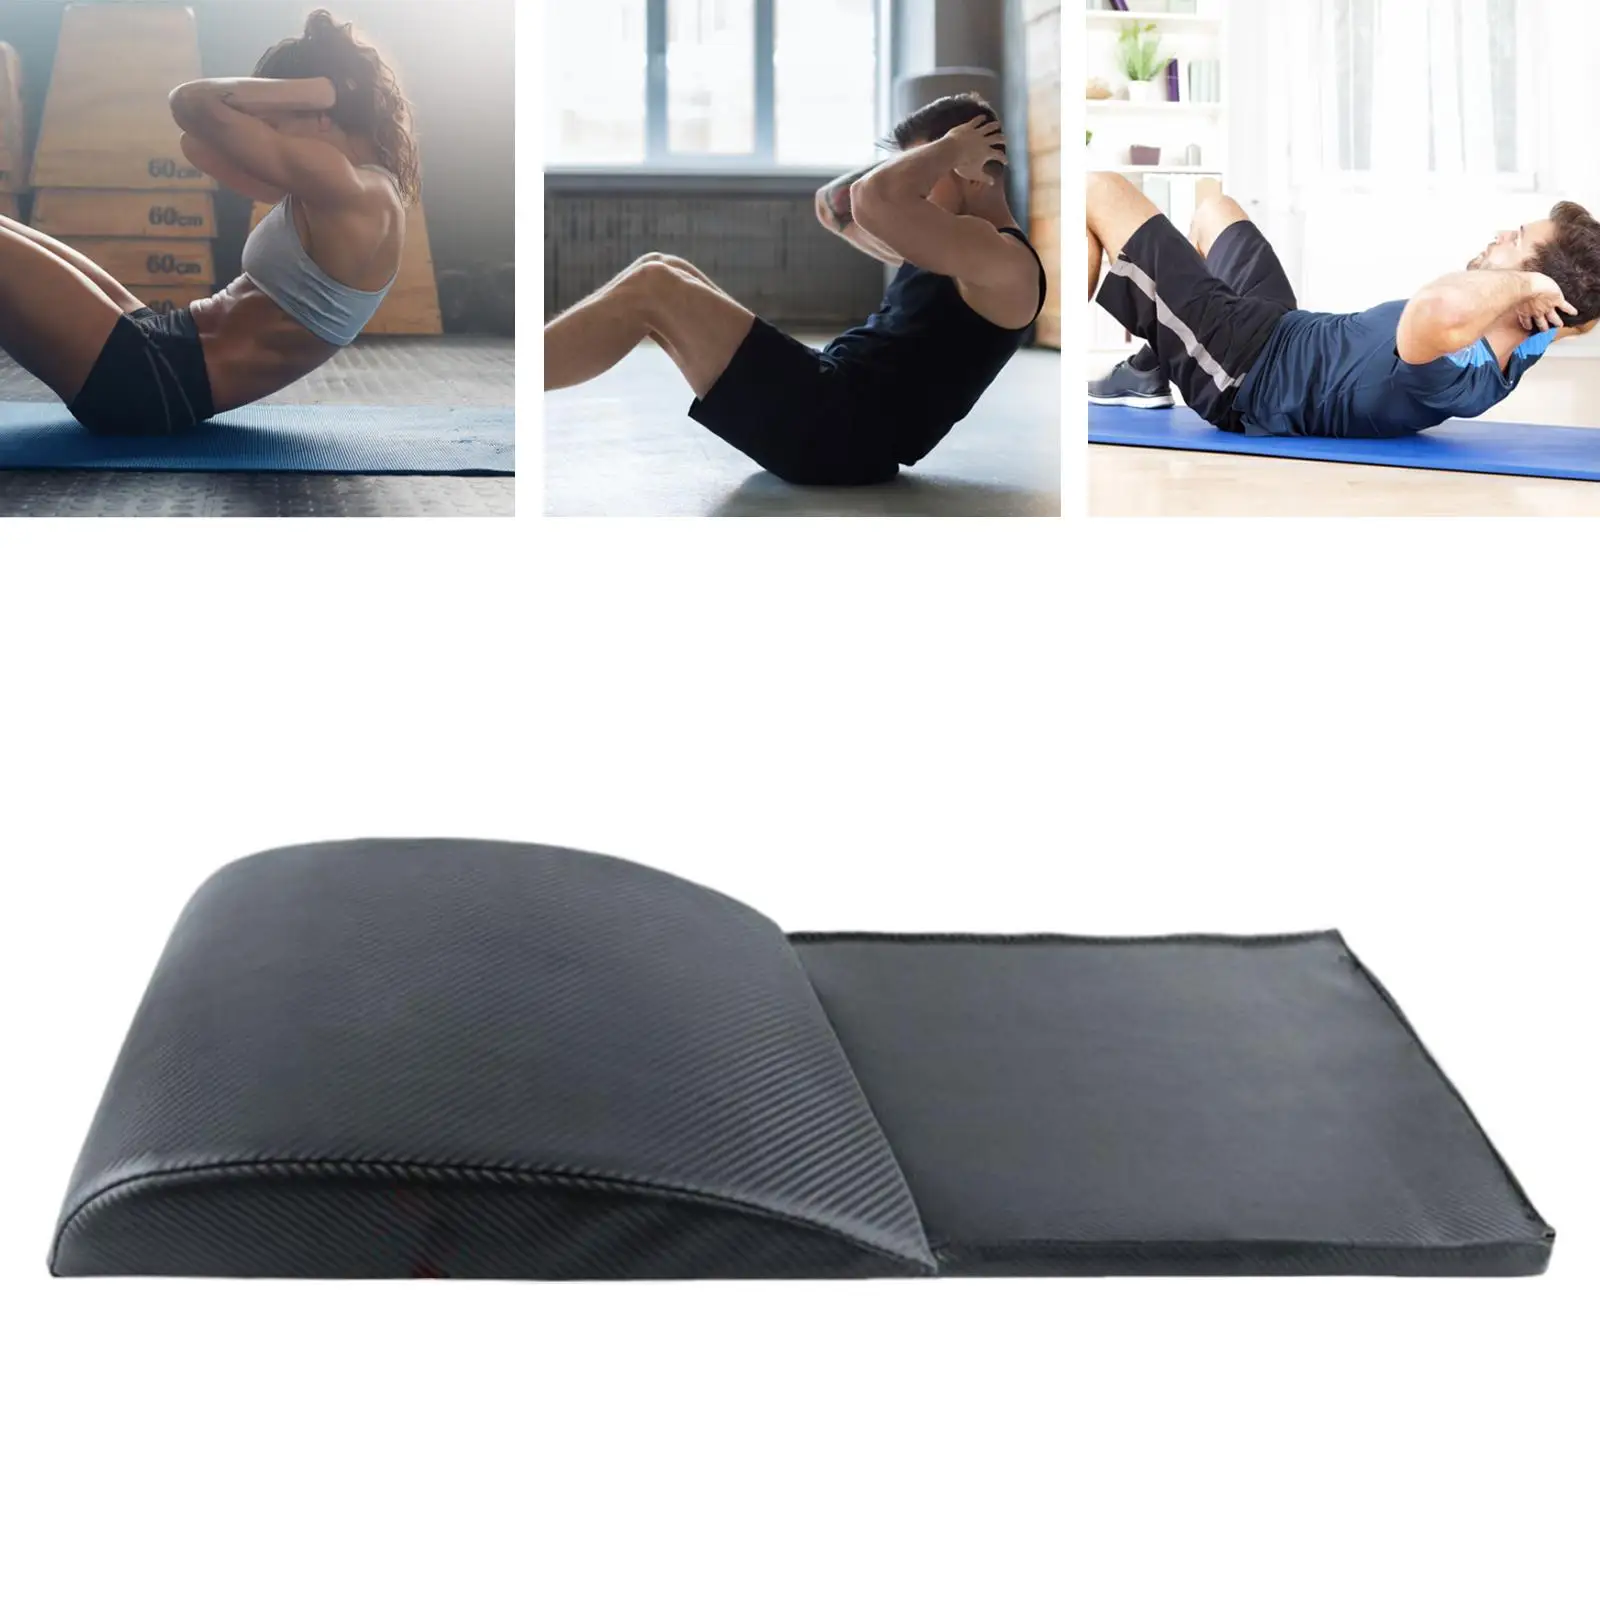 Fitness Ab Pad with Tailbone Protector Workout Equipment Exerciser Trainer Back Support Sweatproof Sit up Mat for Yoga Home Gym